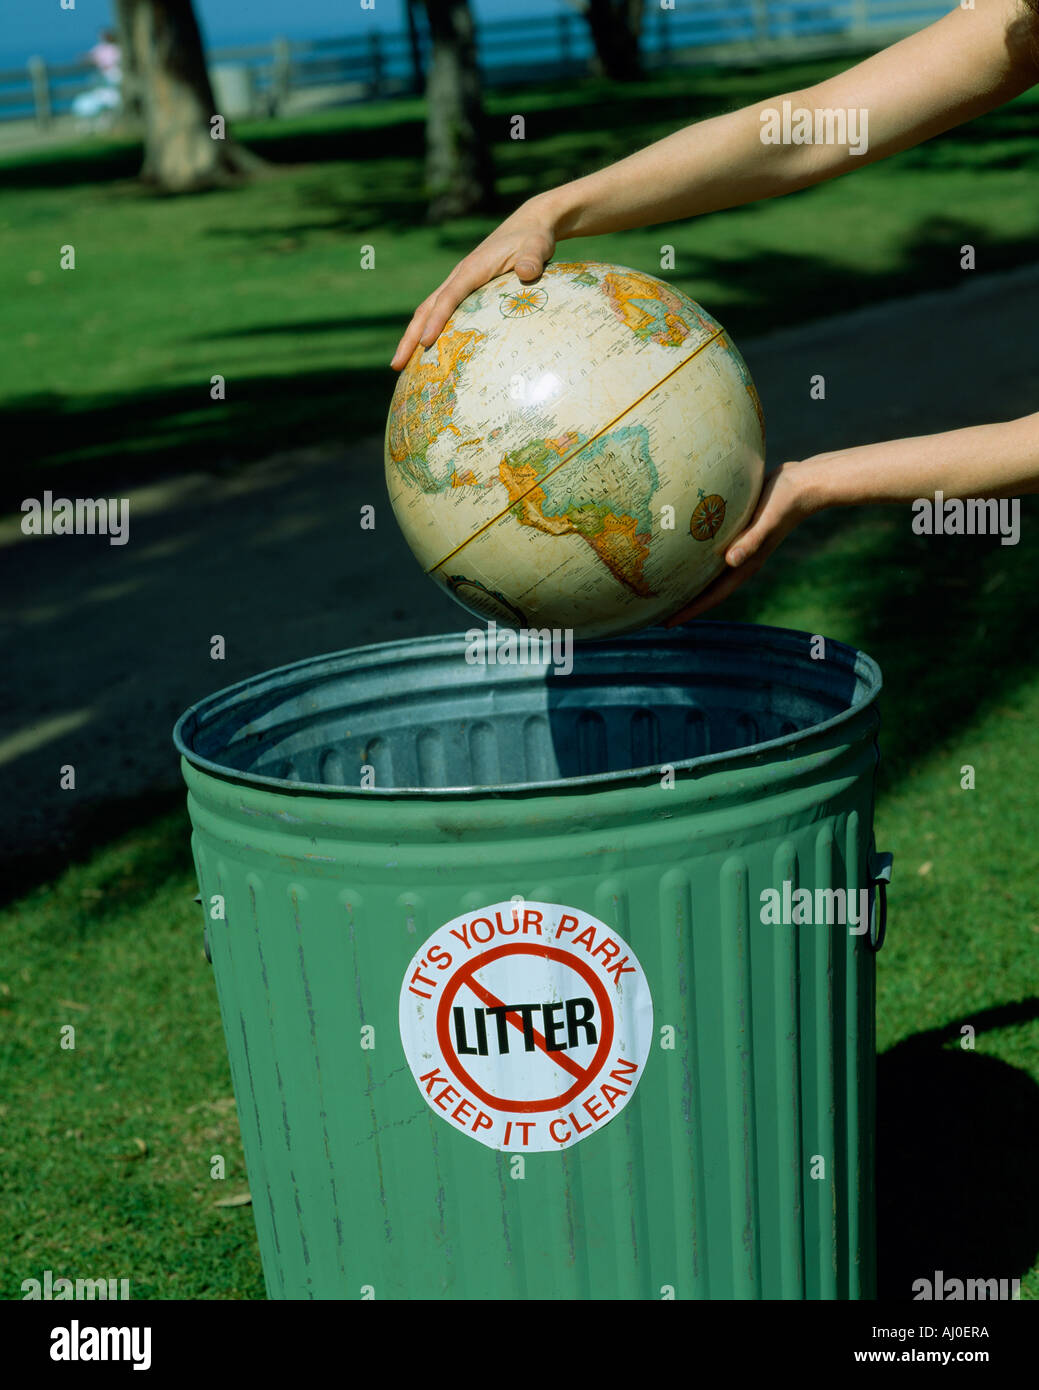 Globe in hands over waste basket environmental care Stock Photo